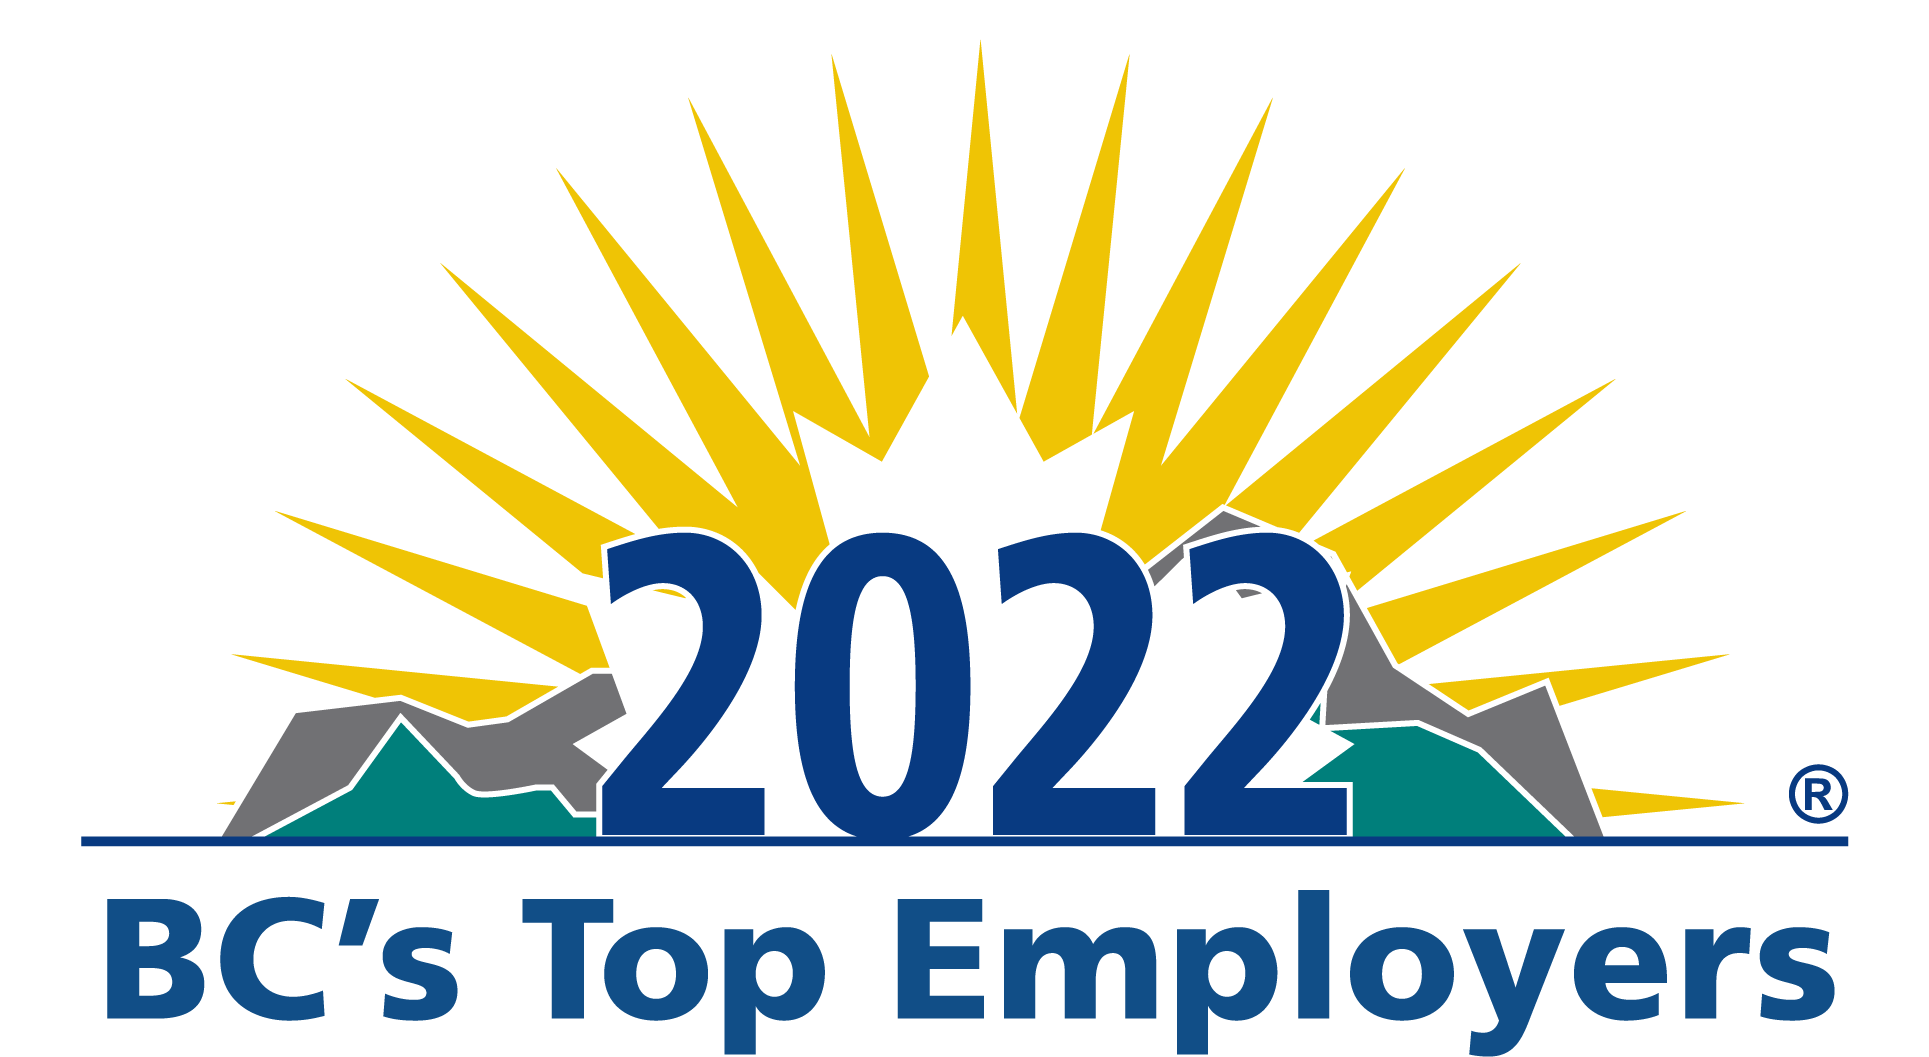 2022 BC's Top Employers logo